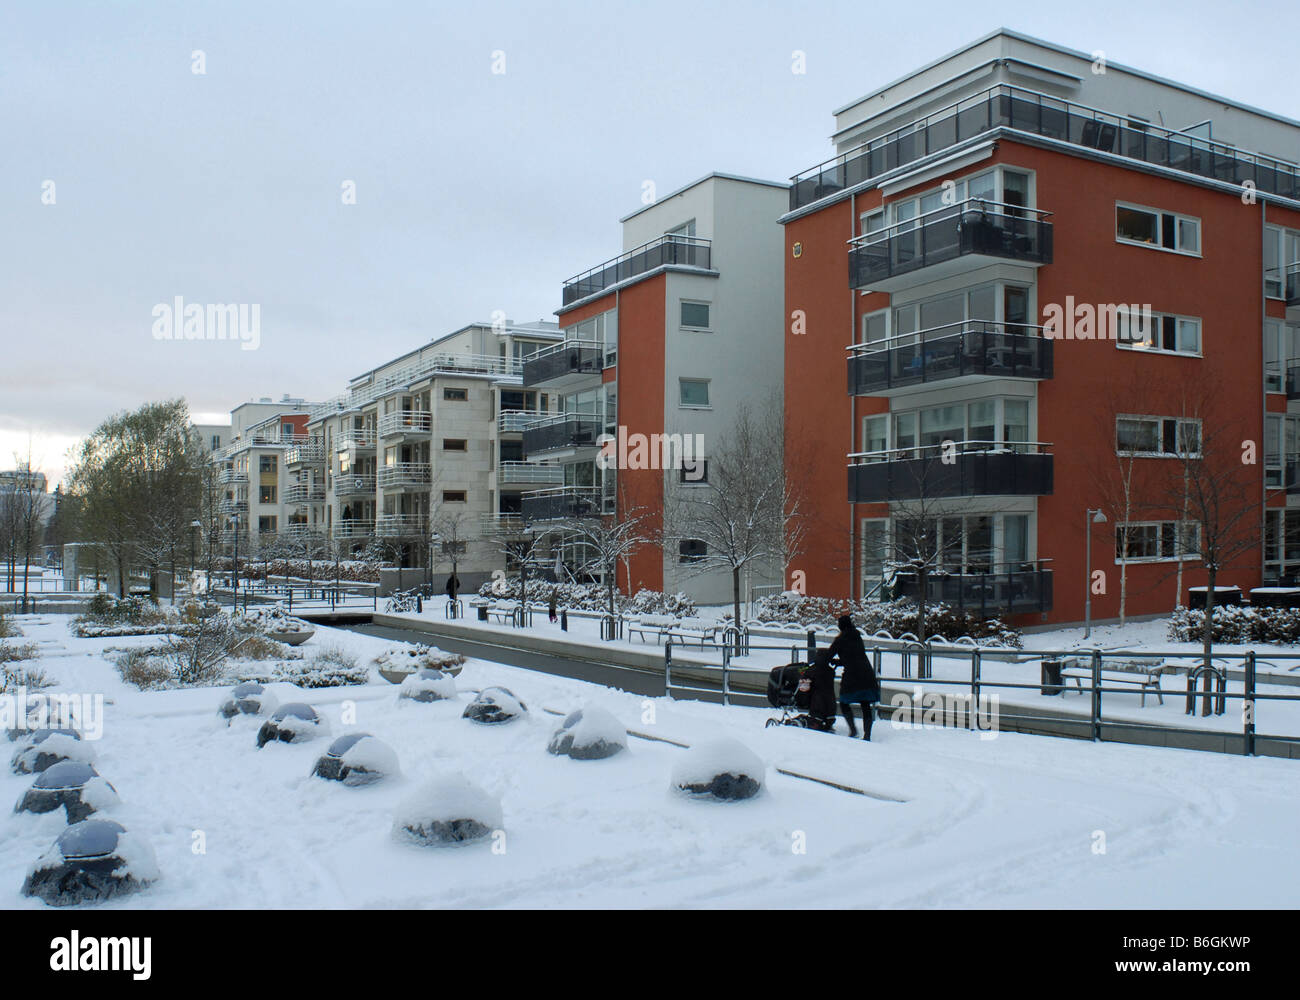 The Hammarby sjöstad district of Stockholm in Sweden where buildings have been constructed to high environmental standards Stock Photo